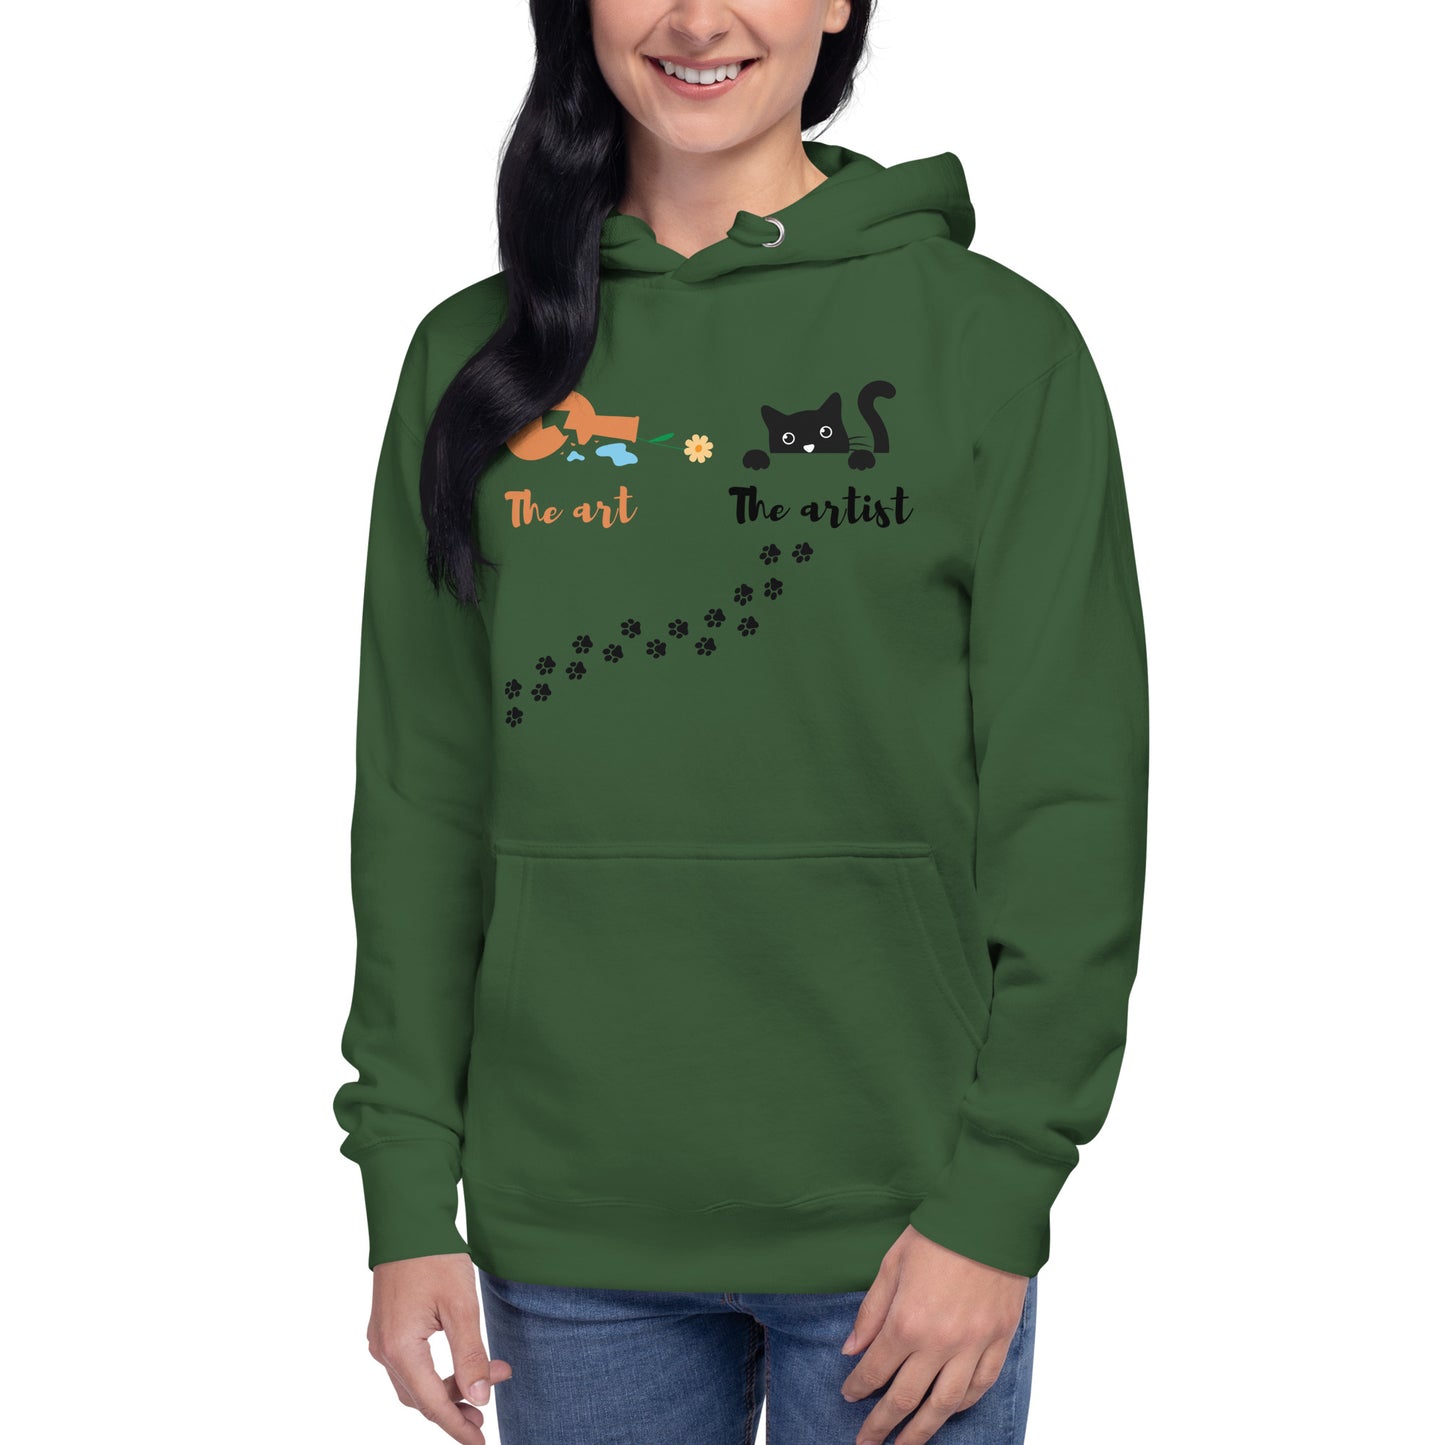 Unisex, graphics, hoodie, cat, humor, funny, cat lovers, animal, vase, situation, casual, gift, animal lovers